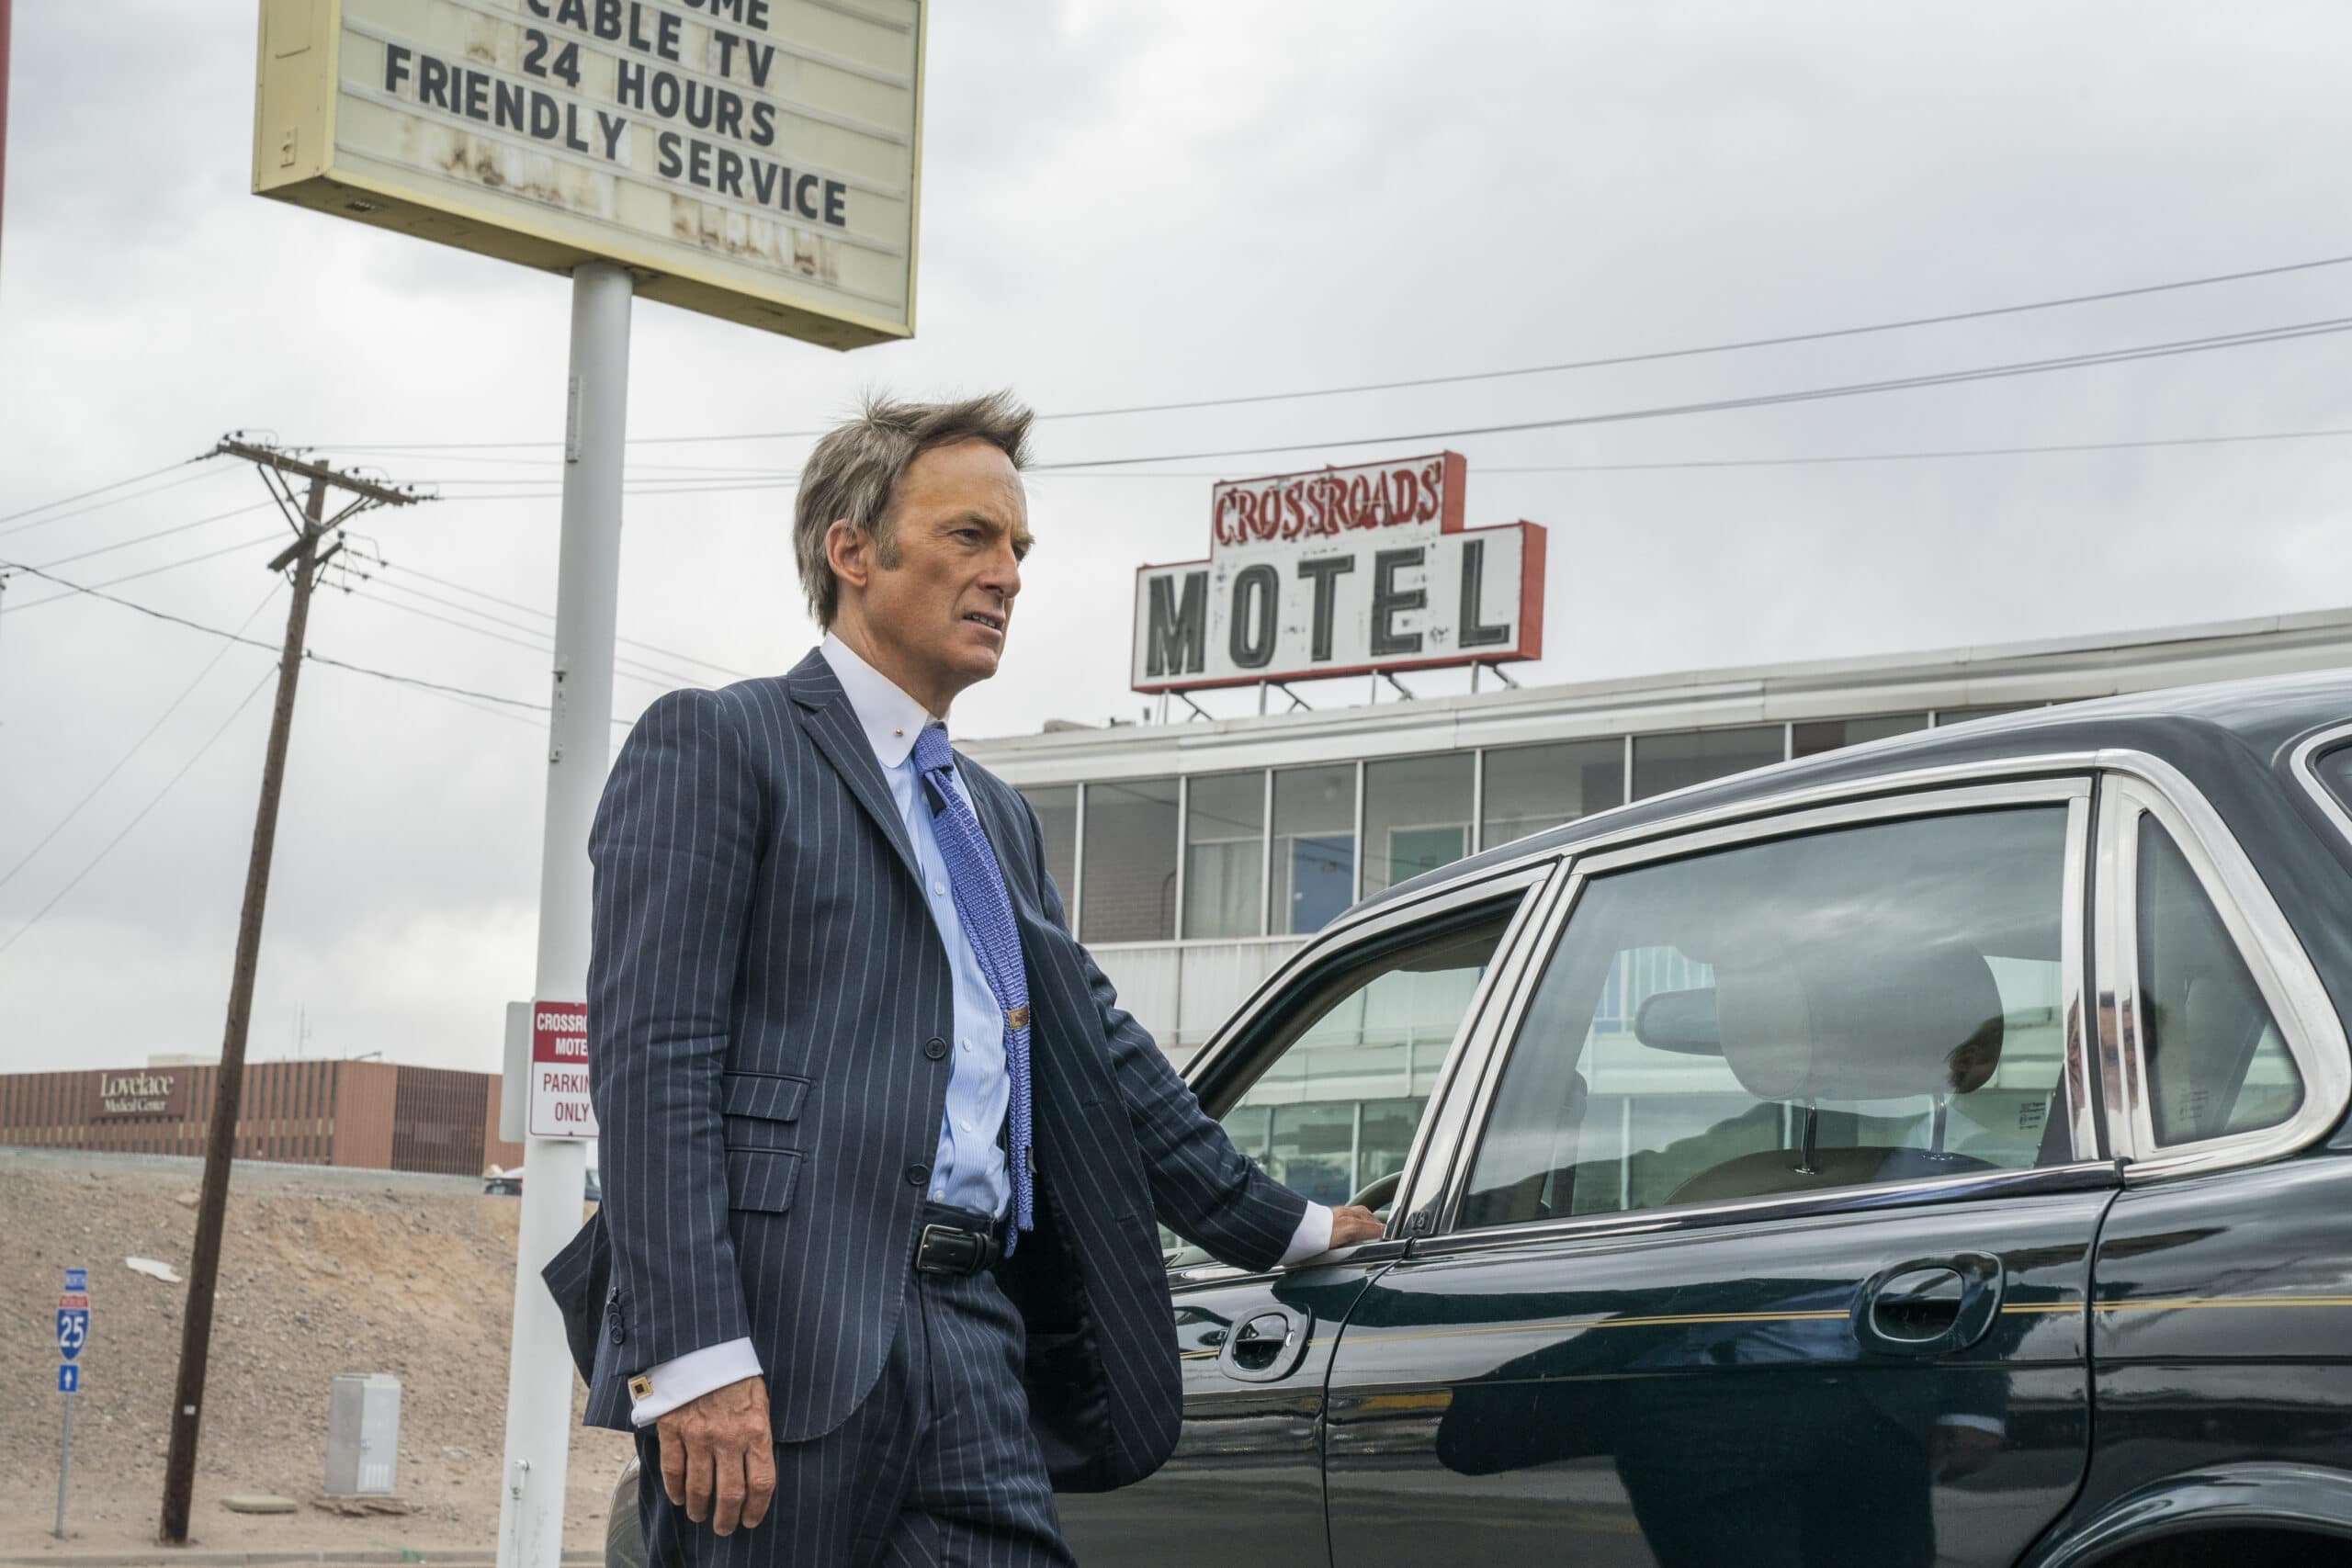 Bob Odenkirk as Saul Goodman - Better Call Saul _ Season 6, Episode 4 - Photo Credit: Greg Lewis/AMC/Sony Pictures Television